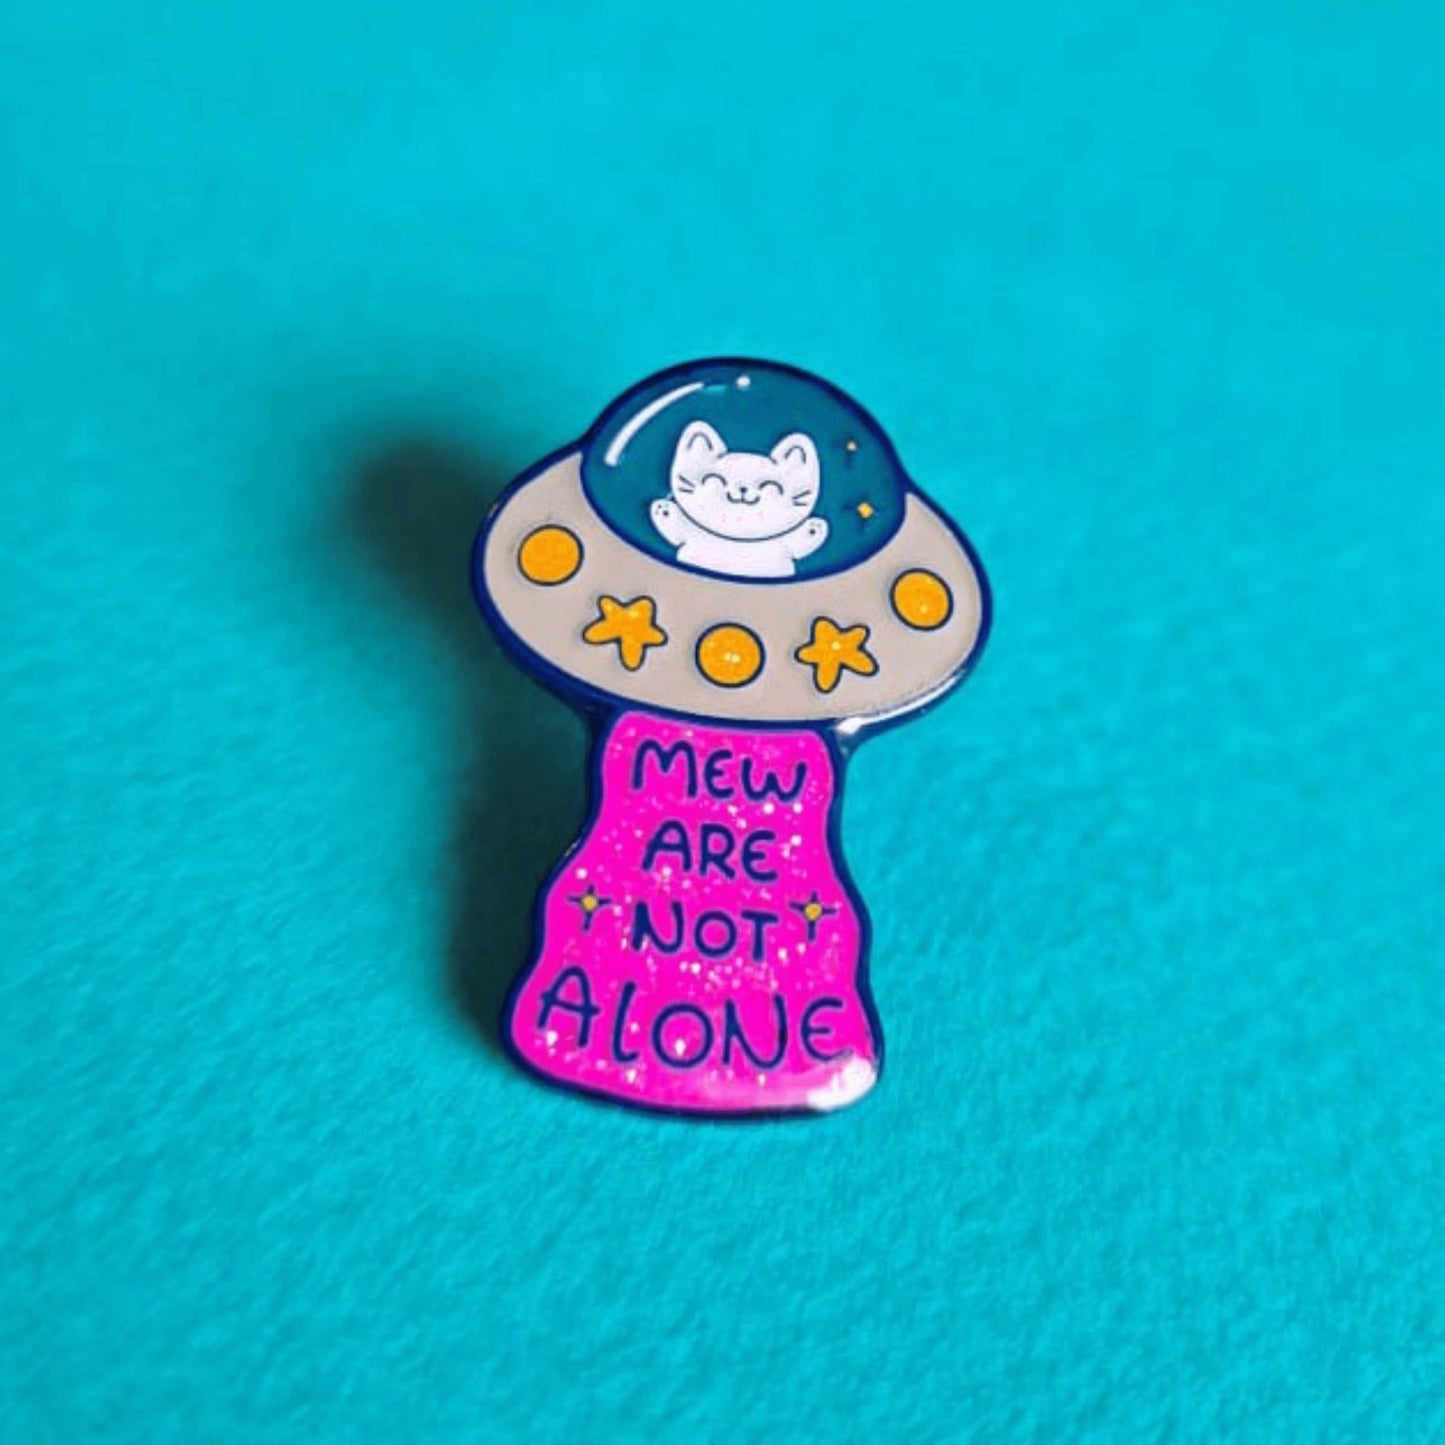 The Cat UFO Mew are not Alone Enamel Pin on a blue background. The blue outline pin is of a white smiling cat in a silver ufo spaceship with yellow glittery stars and circles, underneath is pink glittery beam with blue text reading 'mew are not alone' a pun on you are not alone.